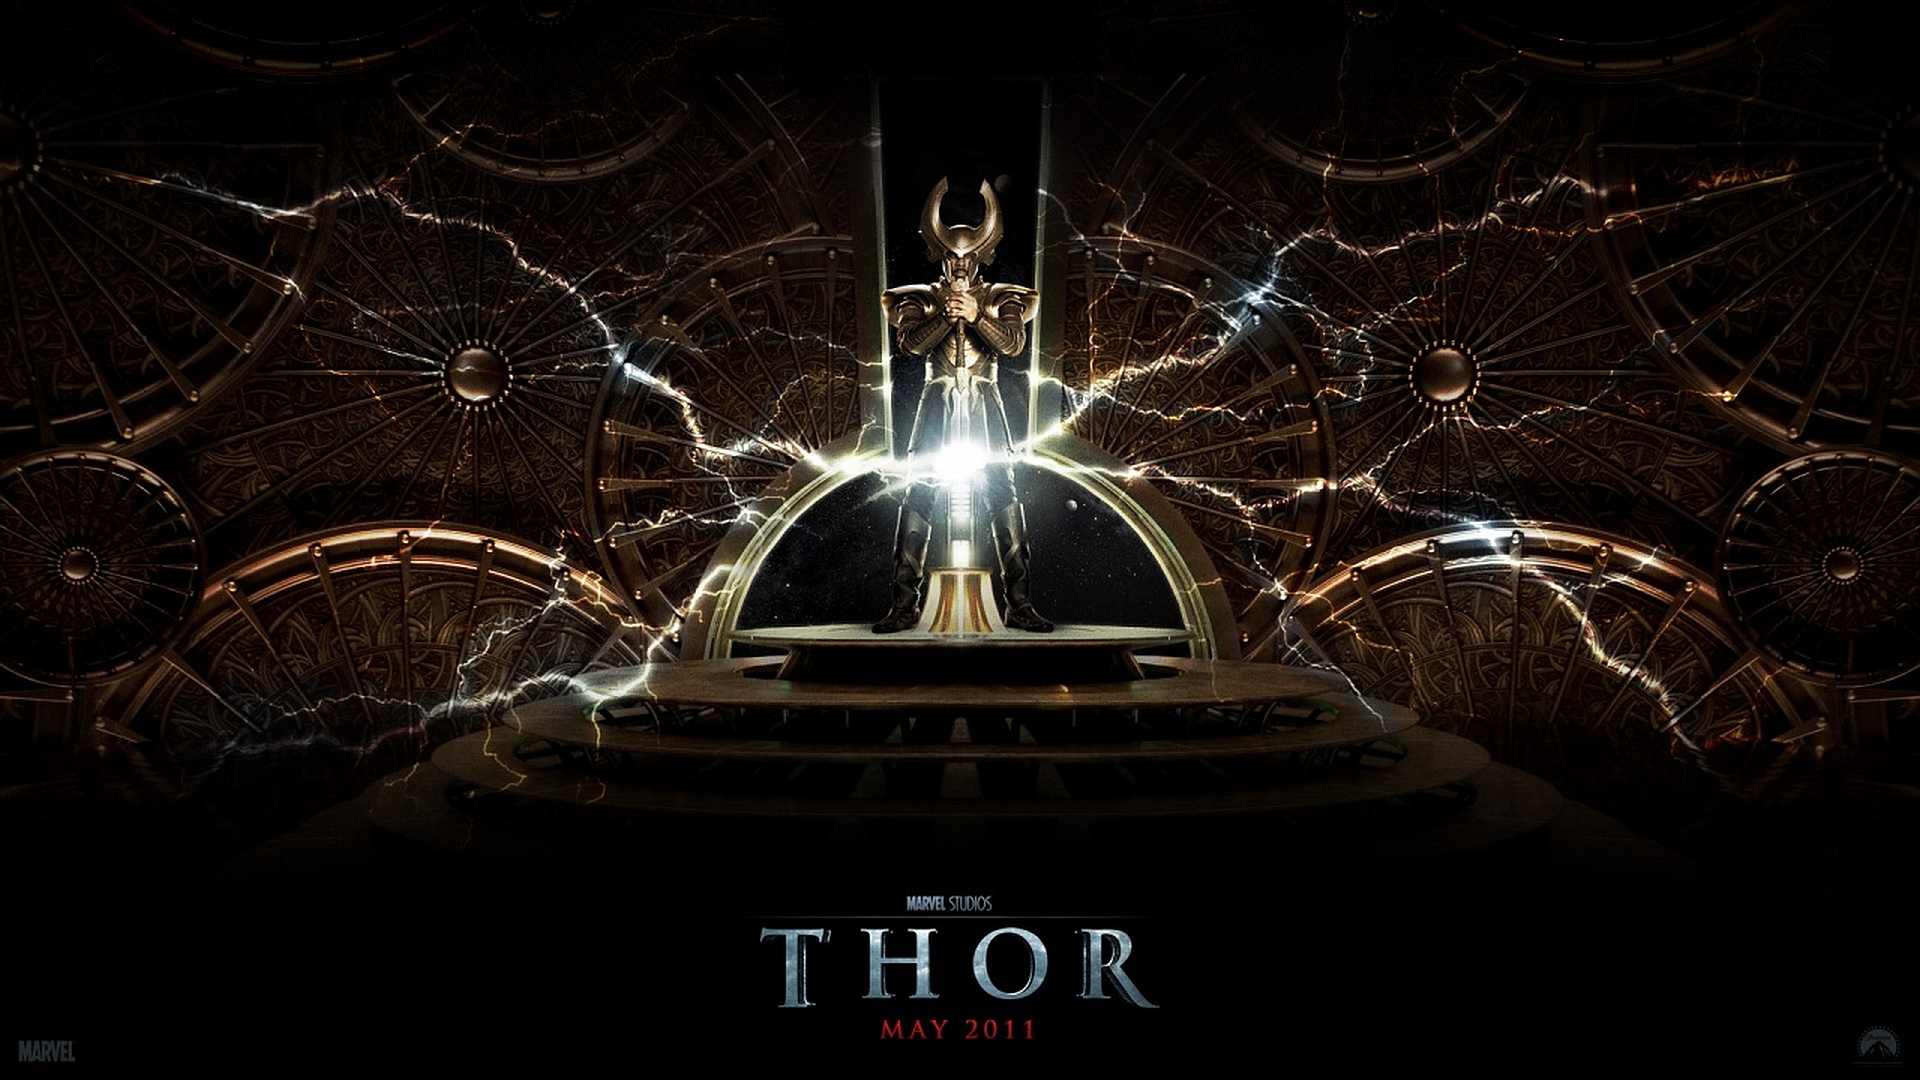 Movie poster featuring Thor